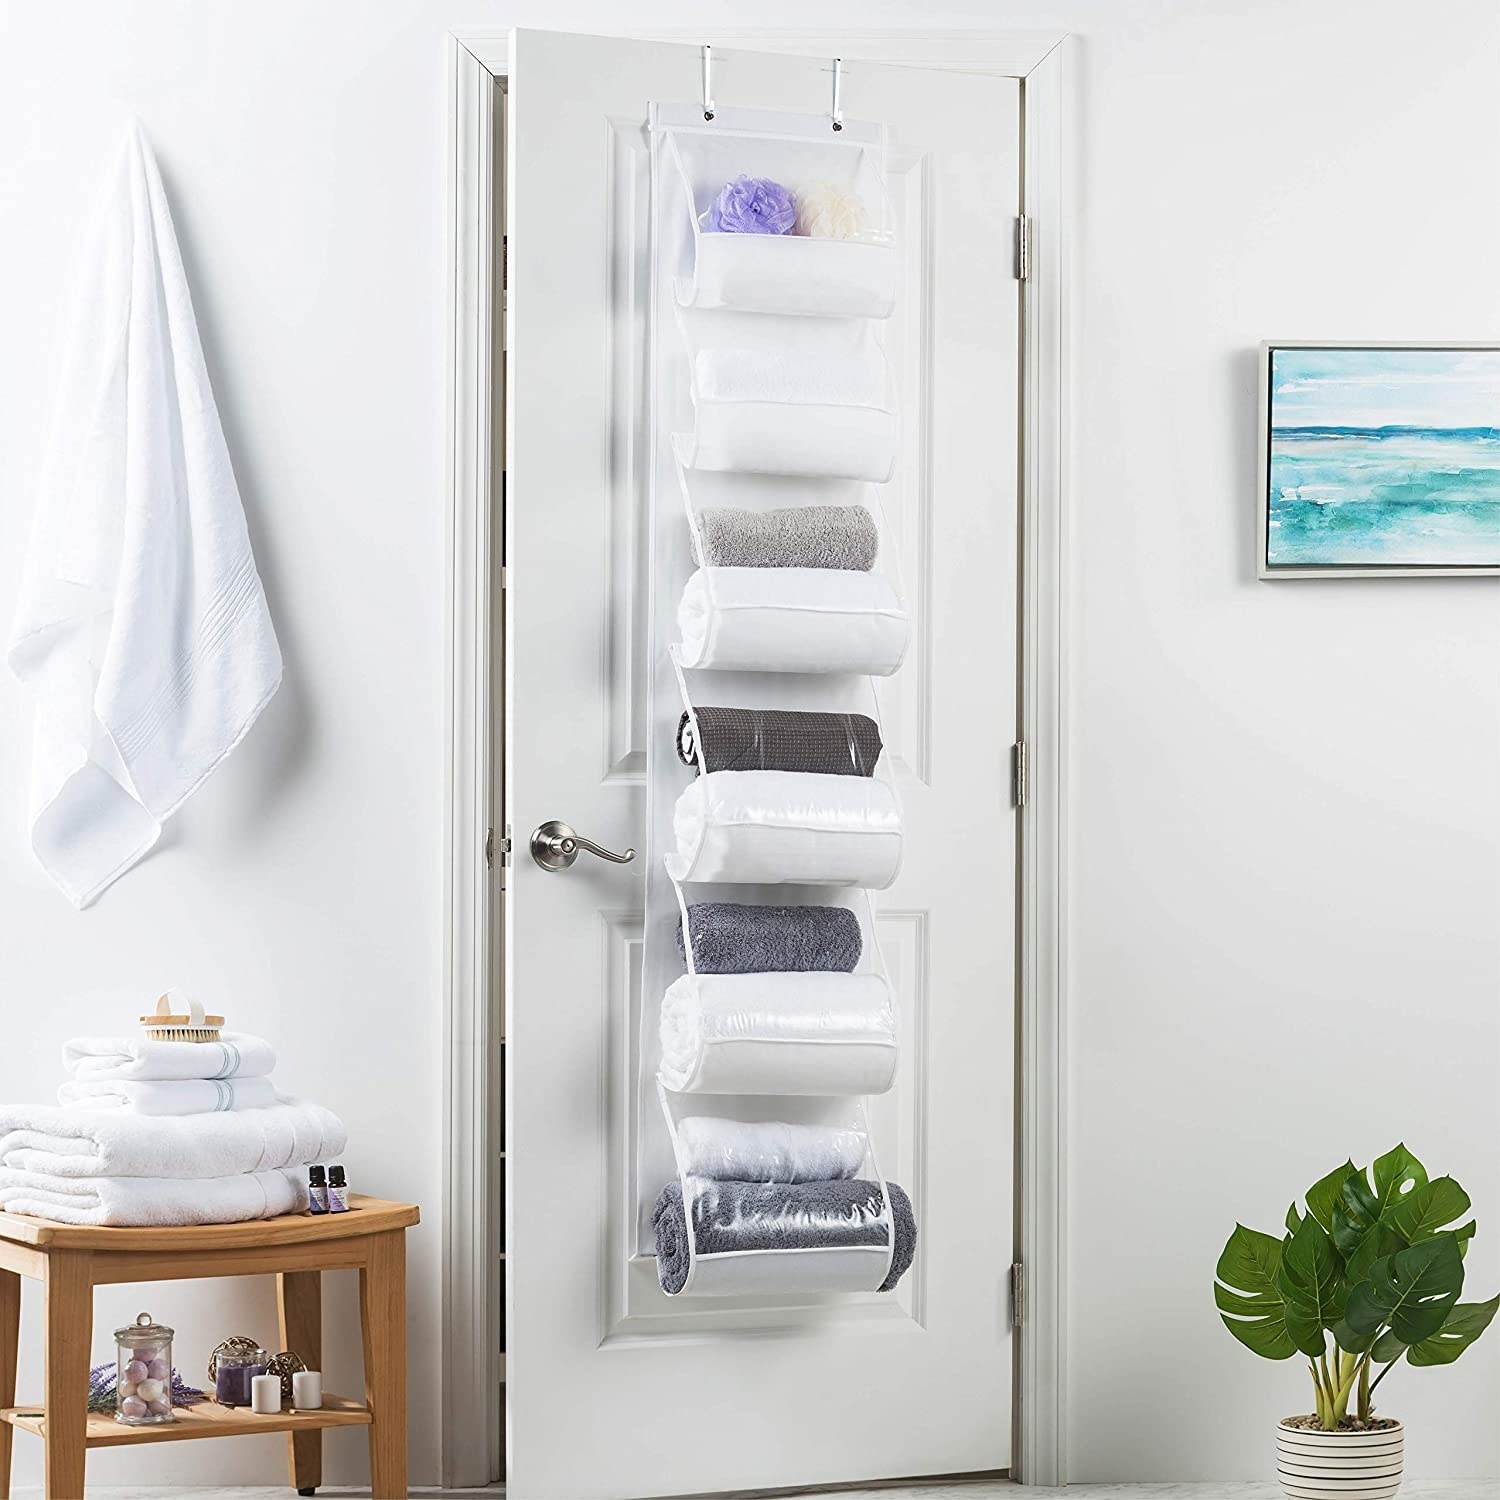 The filled towel organizer on a door